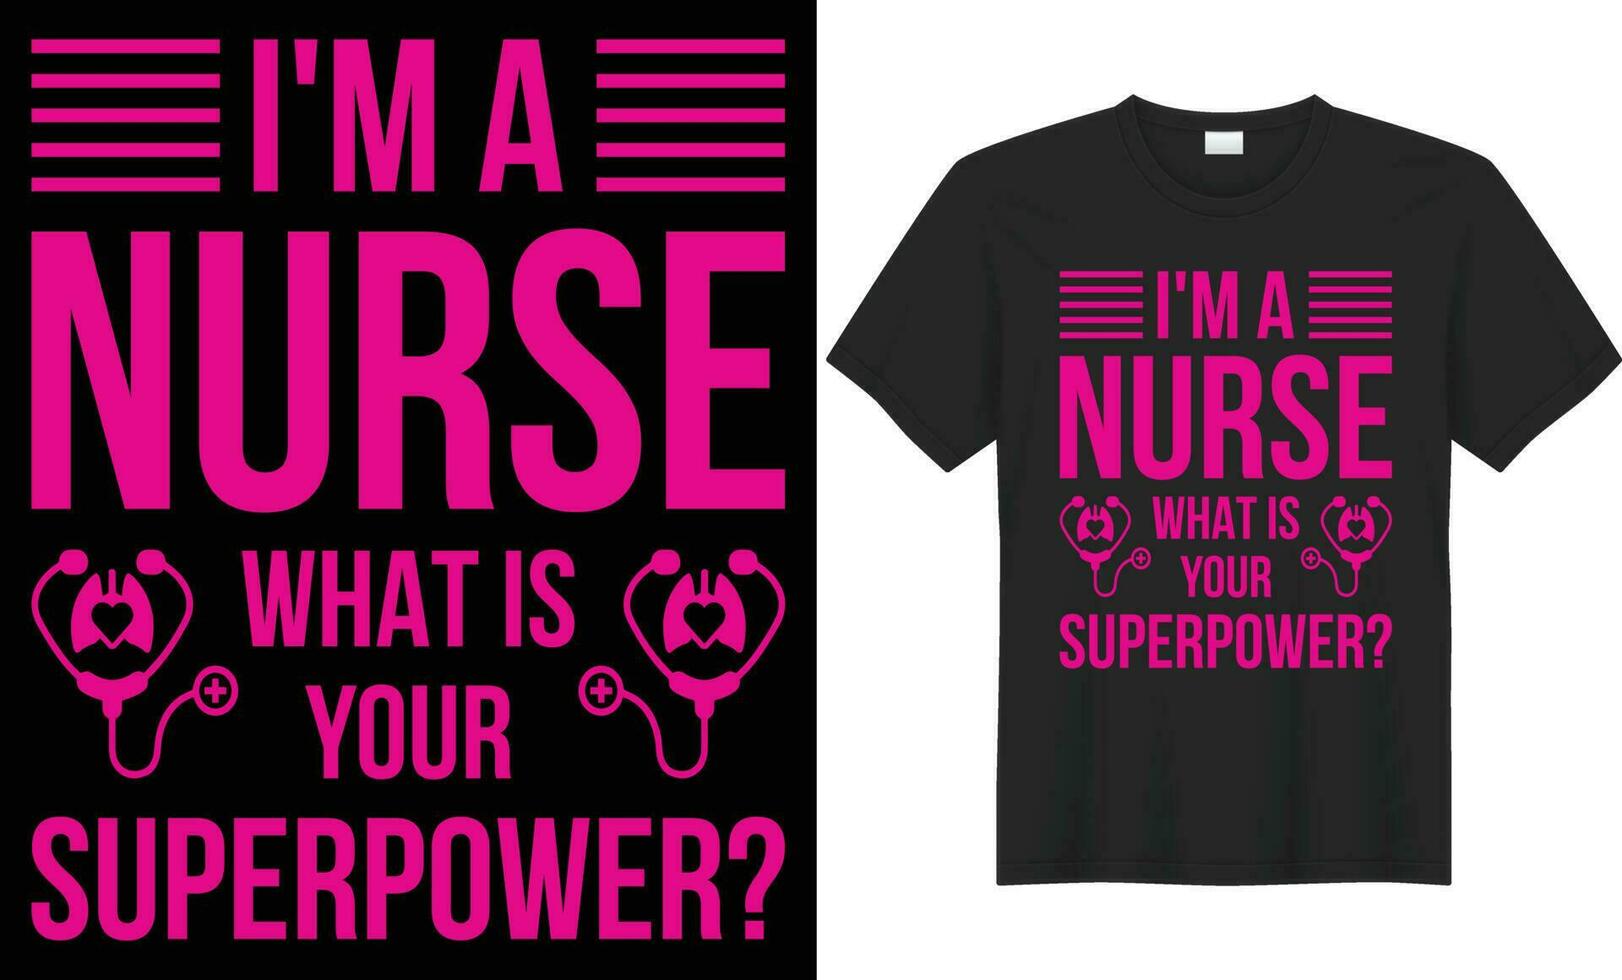 I'm a nurse what is your superpower typography vector t-shirt design. Perfect for print items and bags, poster, mug, template, banner. Handwritten vector illustration. Isolated on black background.